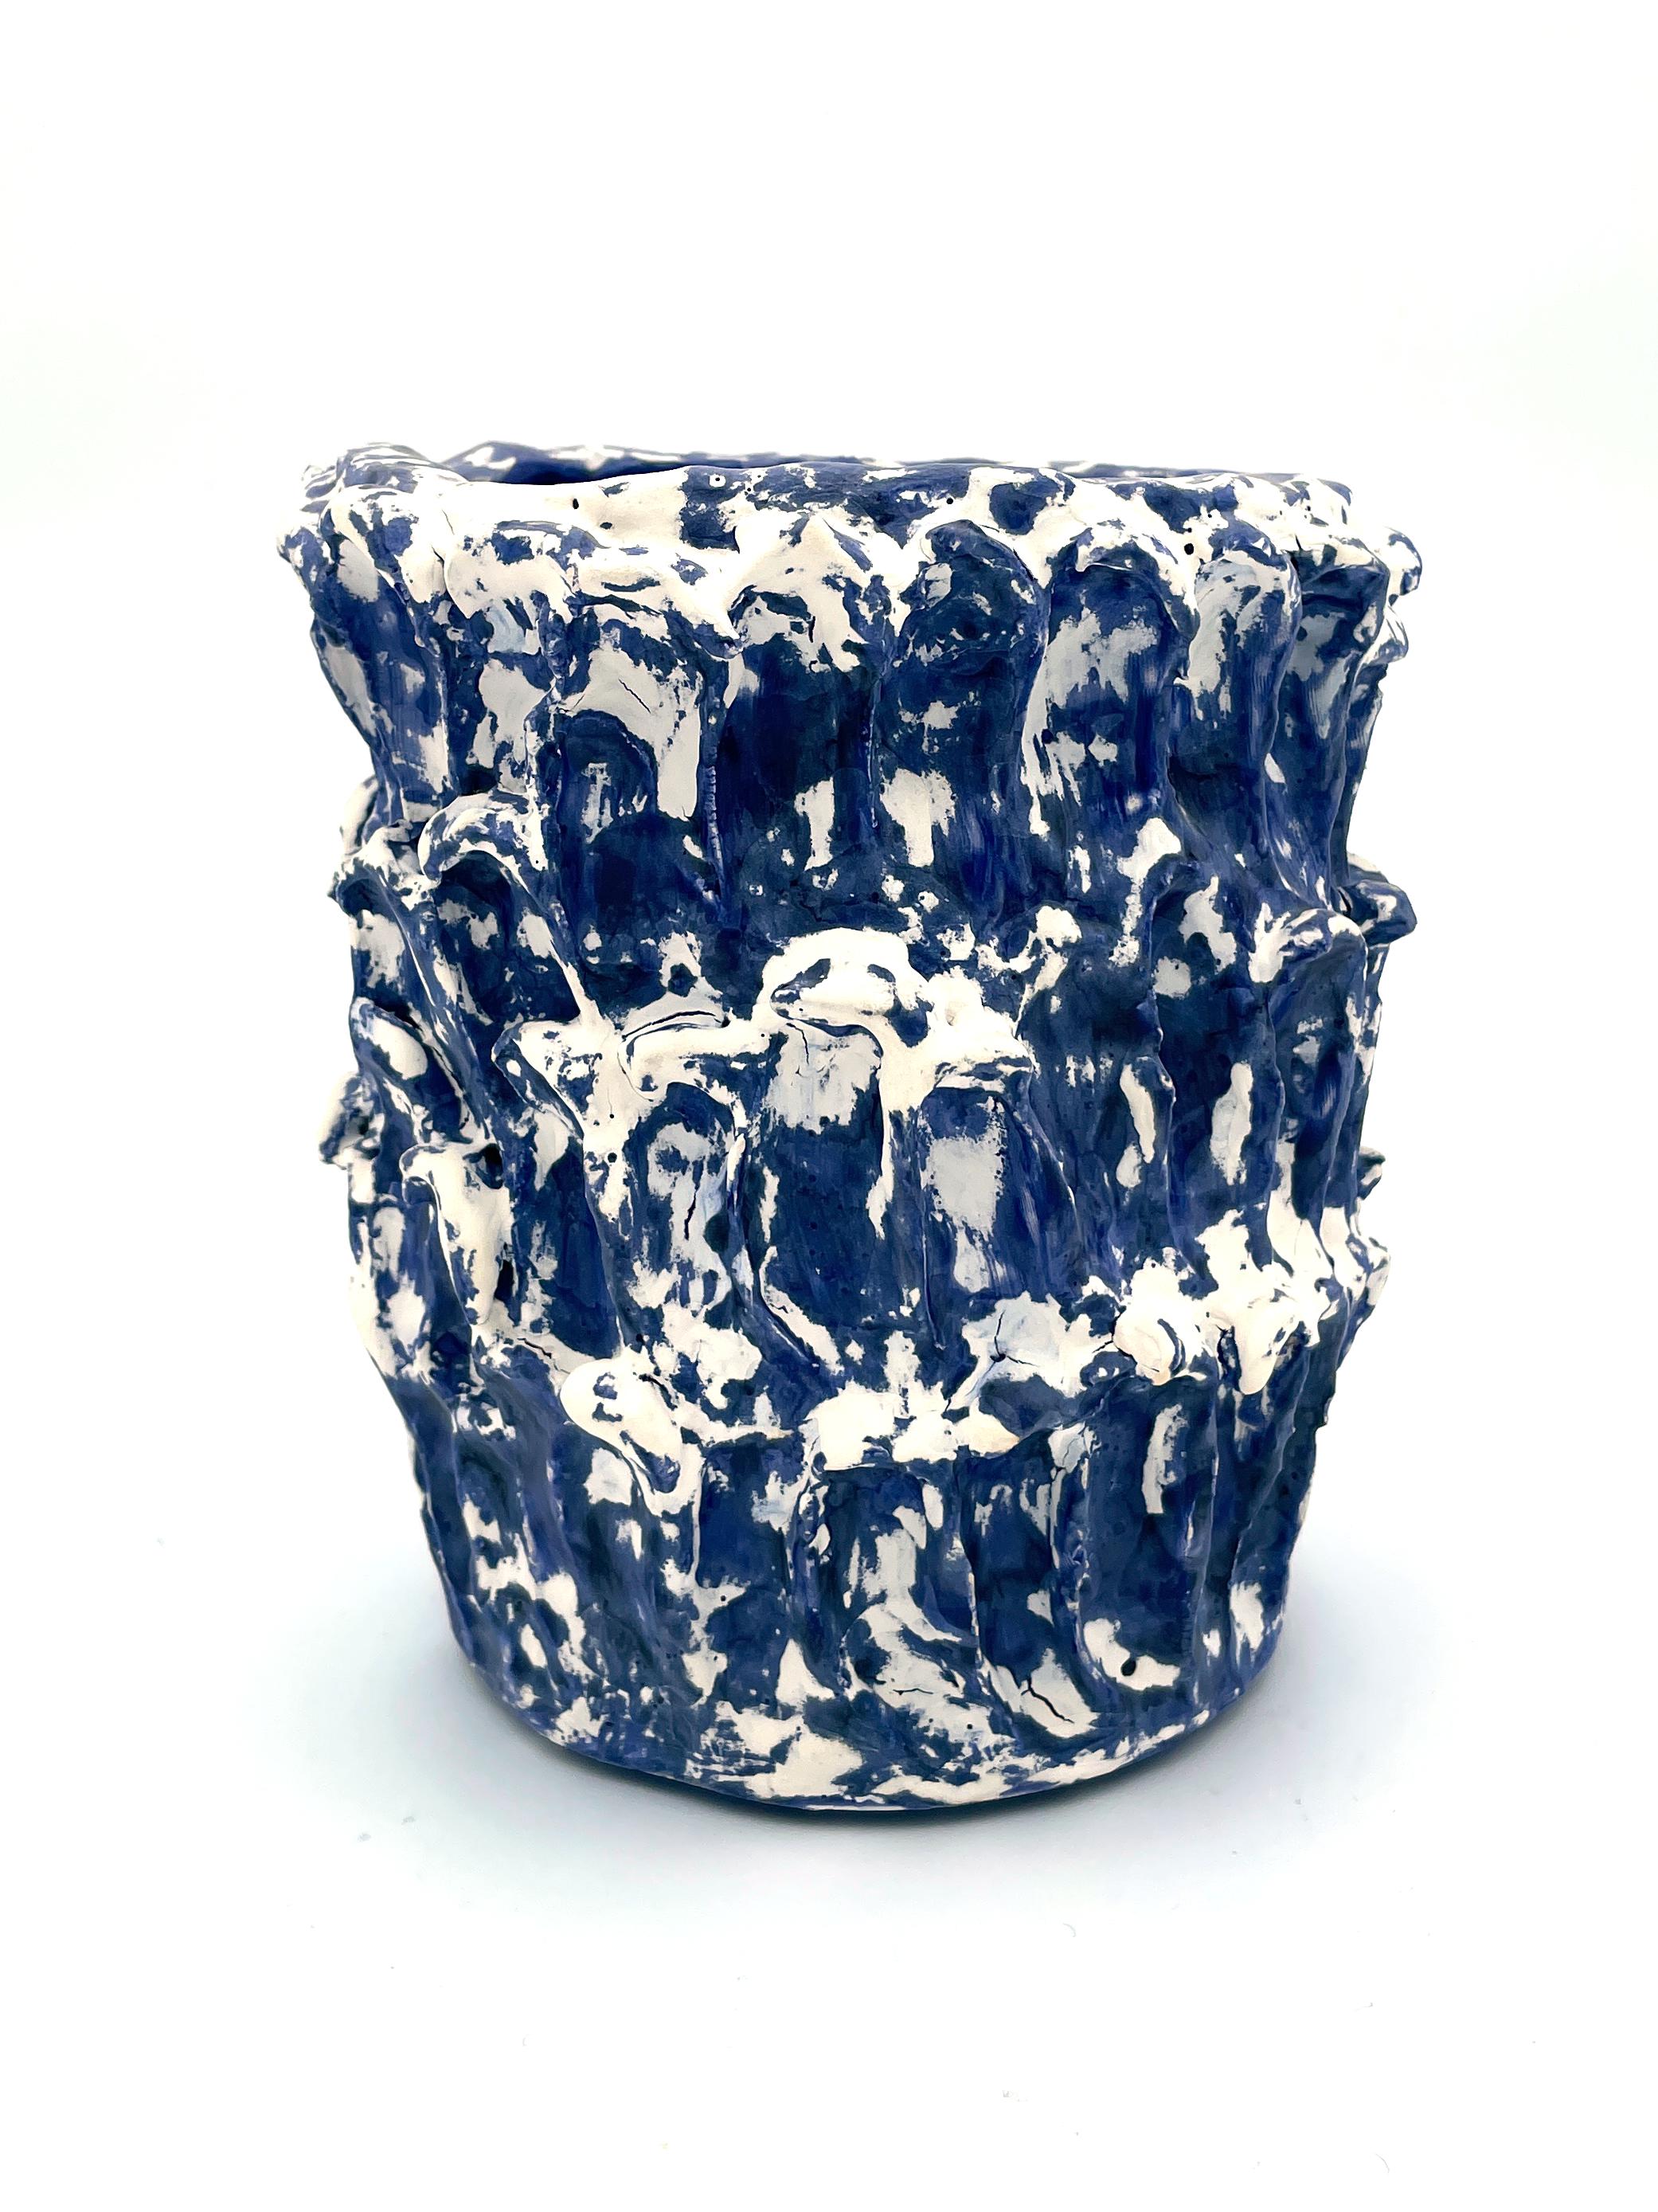 Contemporary Onda Vase, Small, Izmir Blue and Frost White 01 For Sale